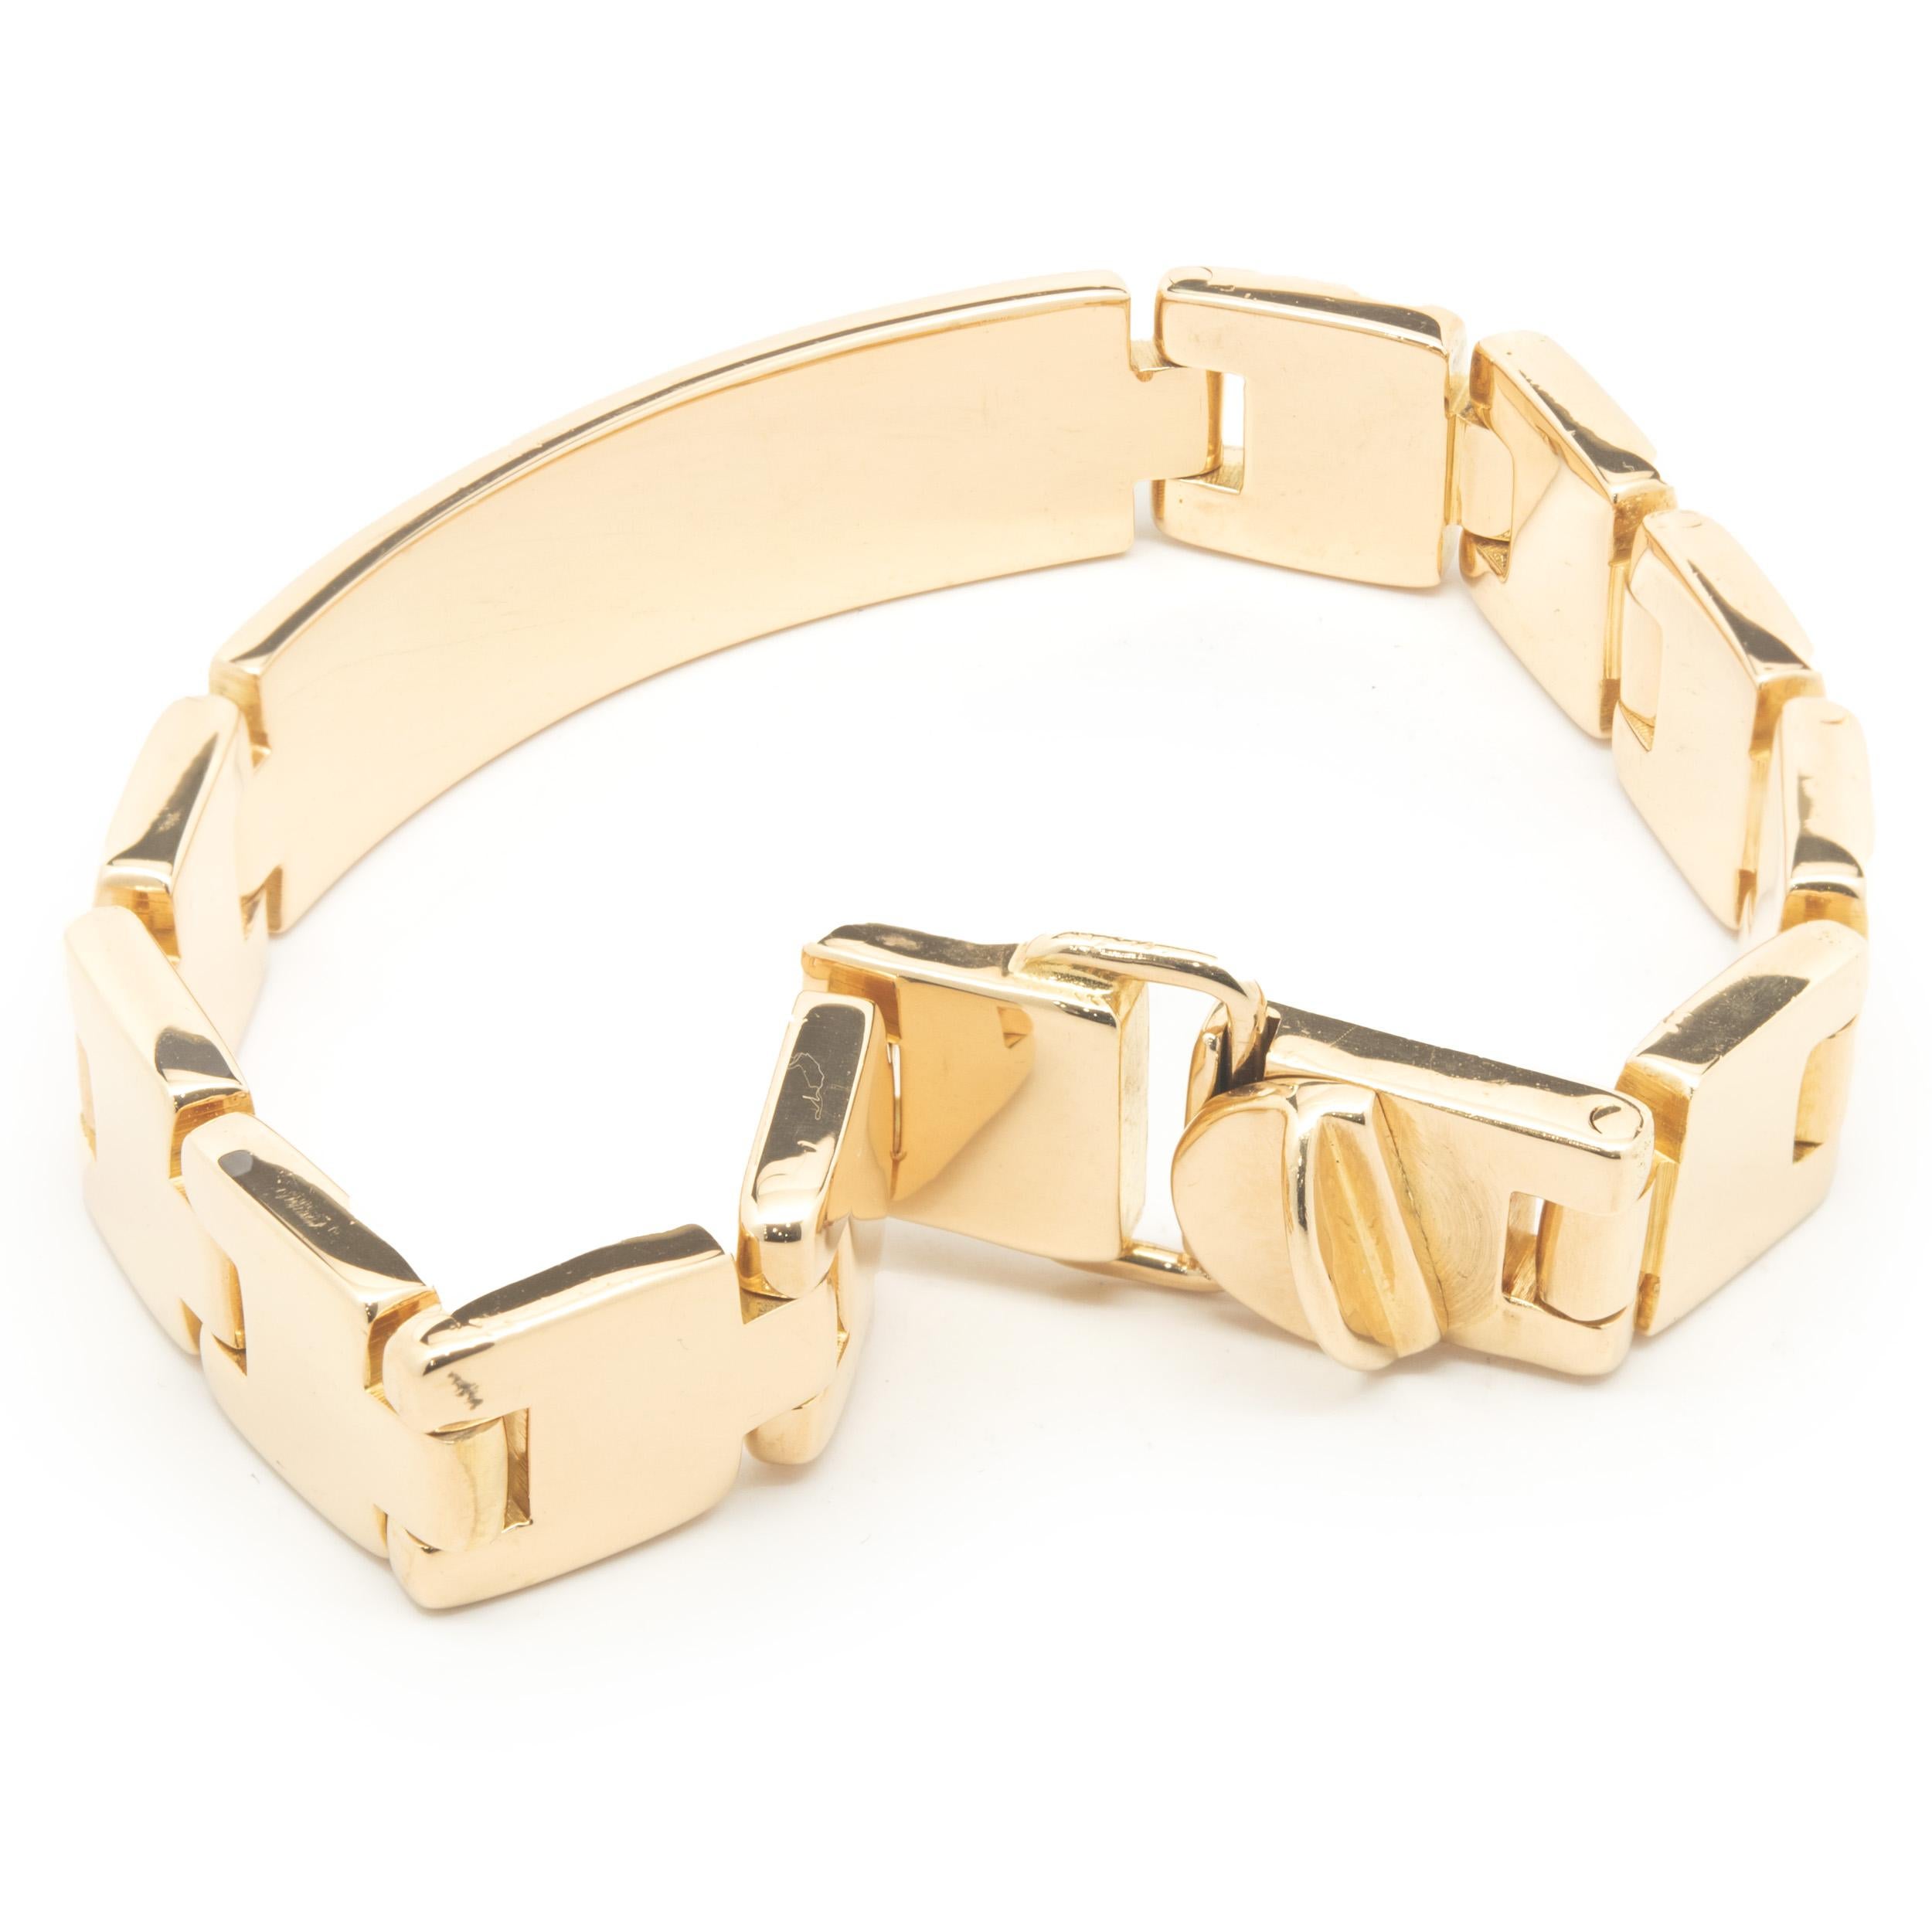 Designer: Gucci
Material: 18K yellow gold
Weight: 100.05 grams